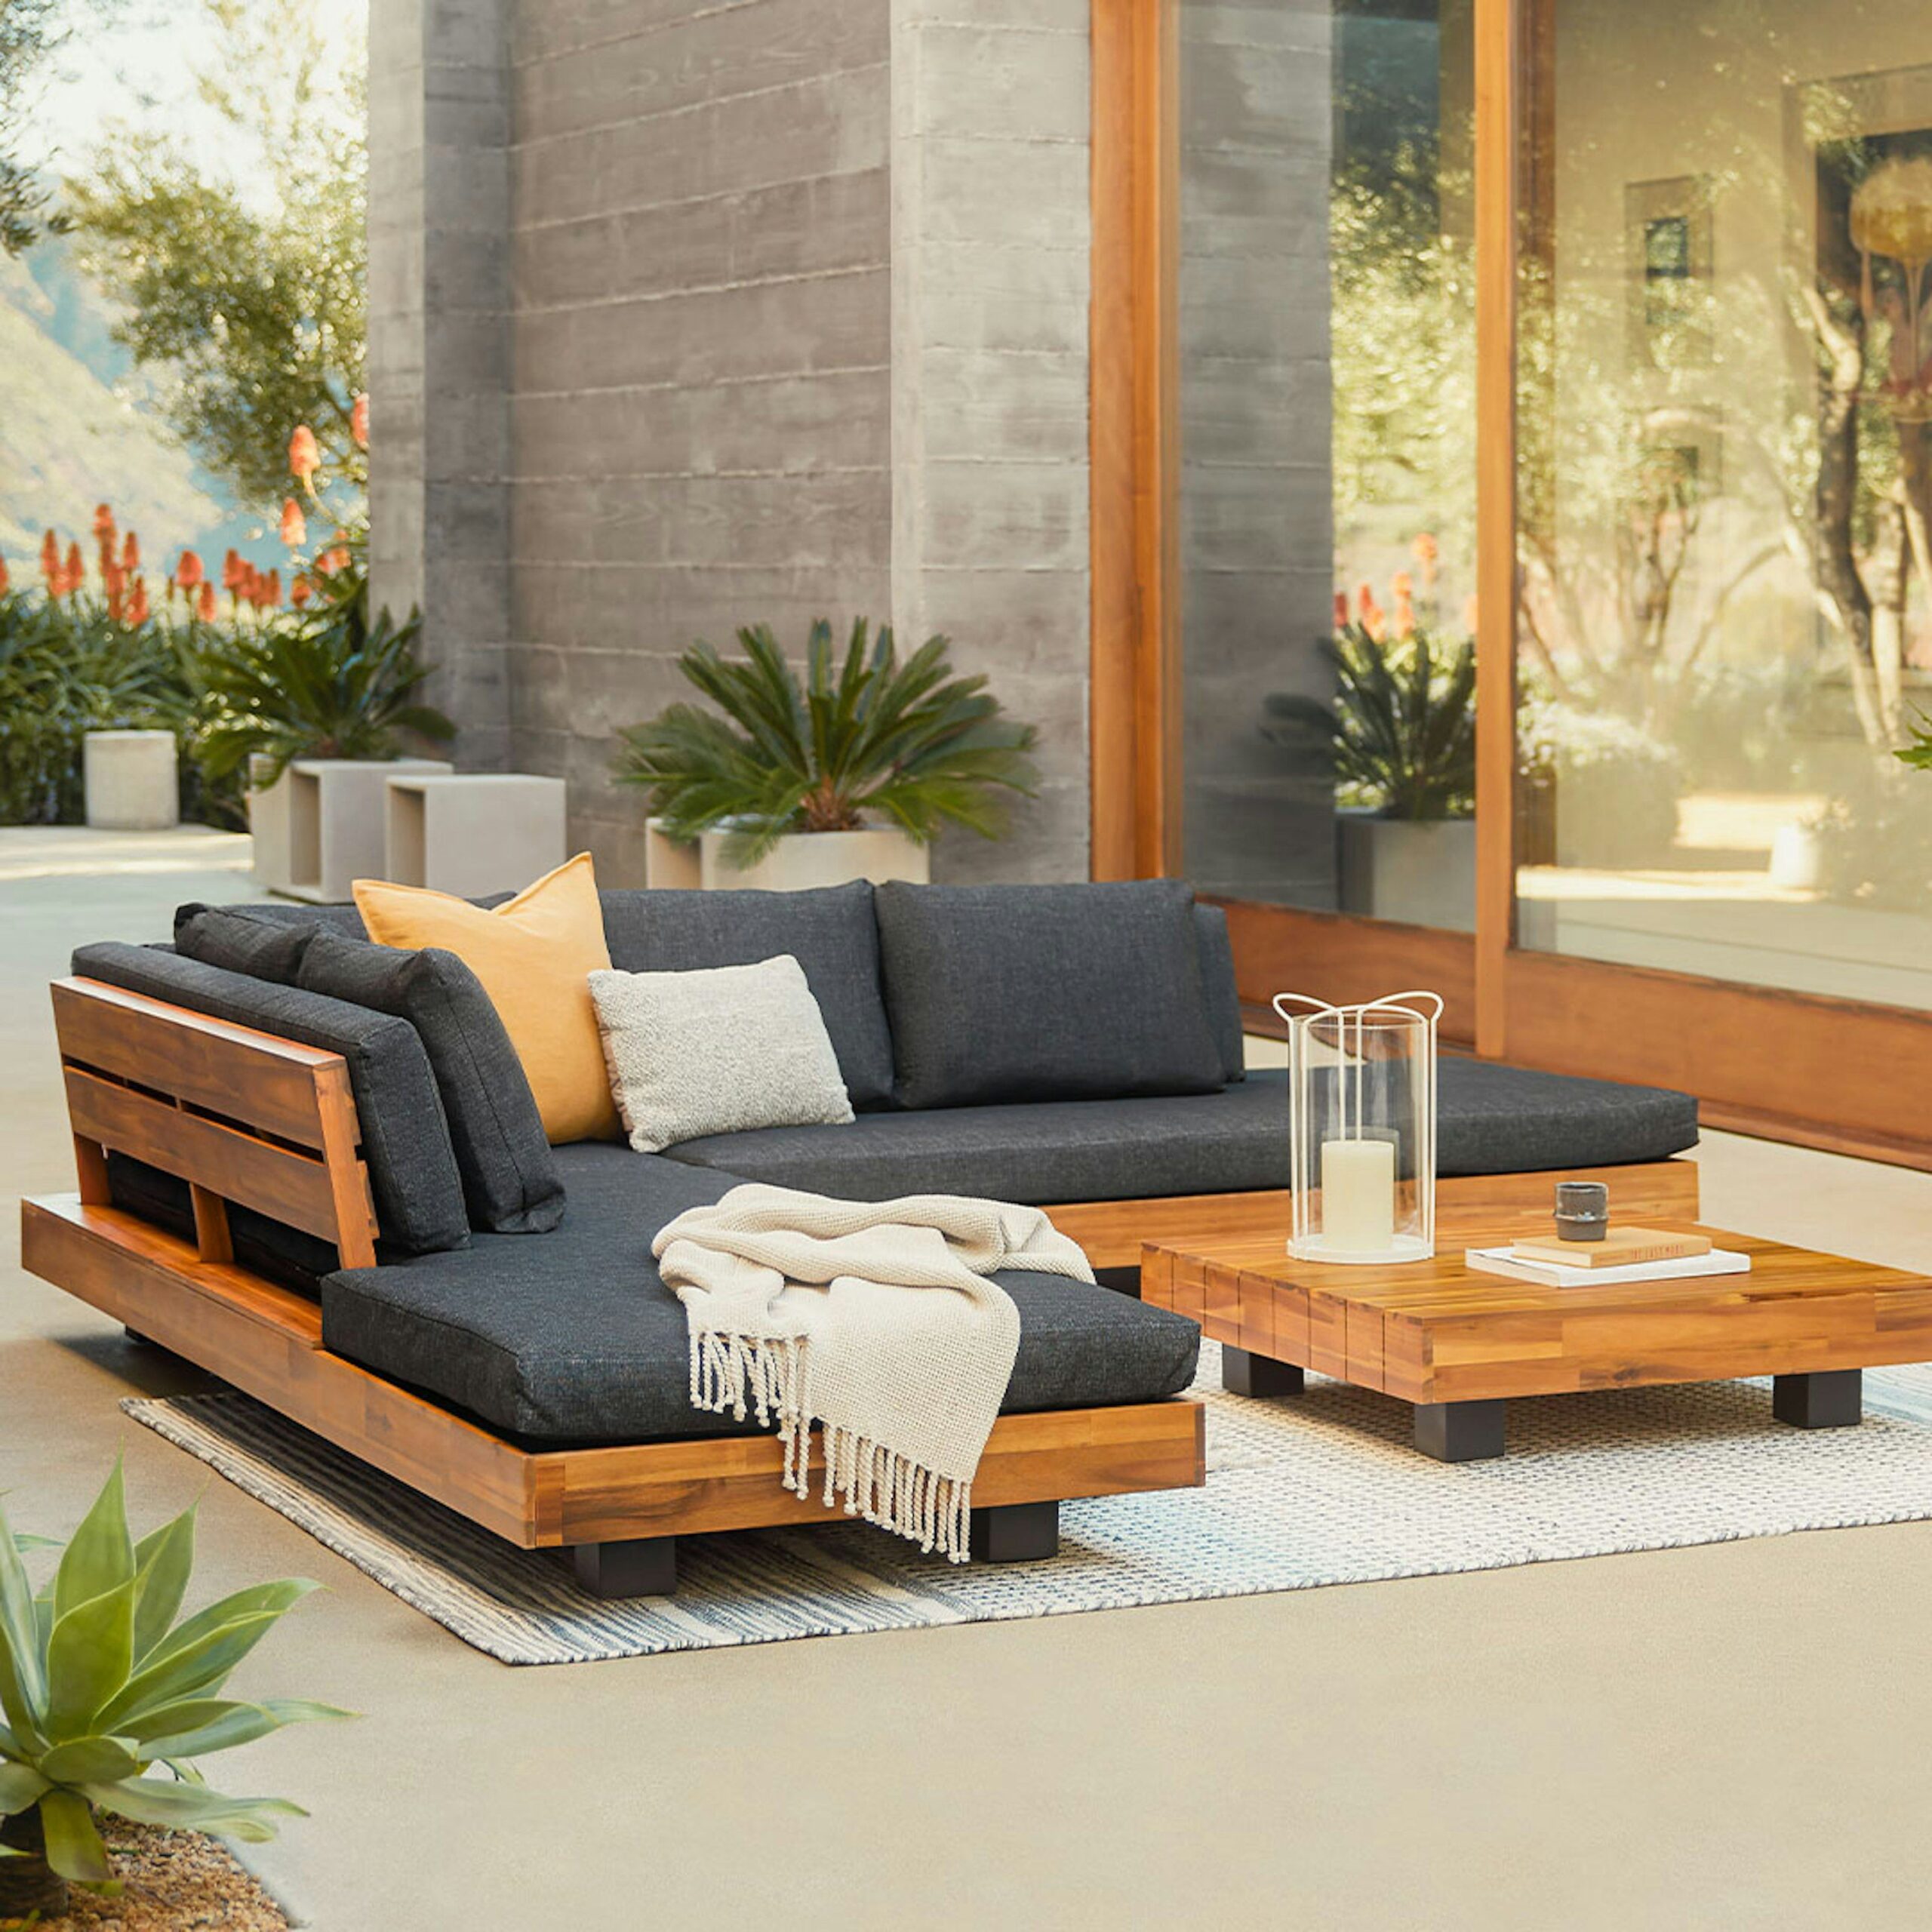 Elevate Your Outdoor Space with Stylish
Living Furniture